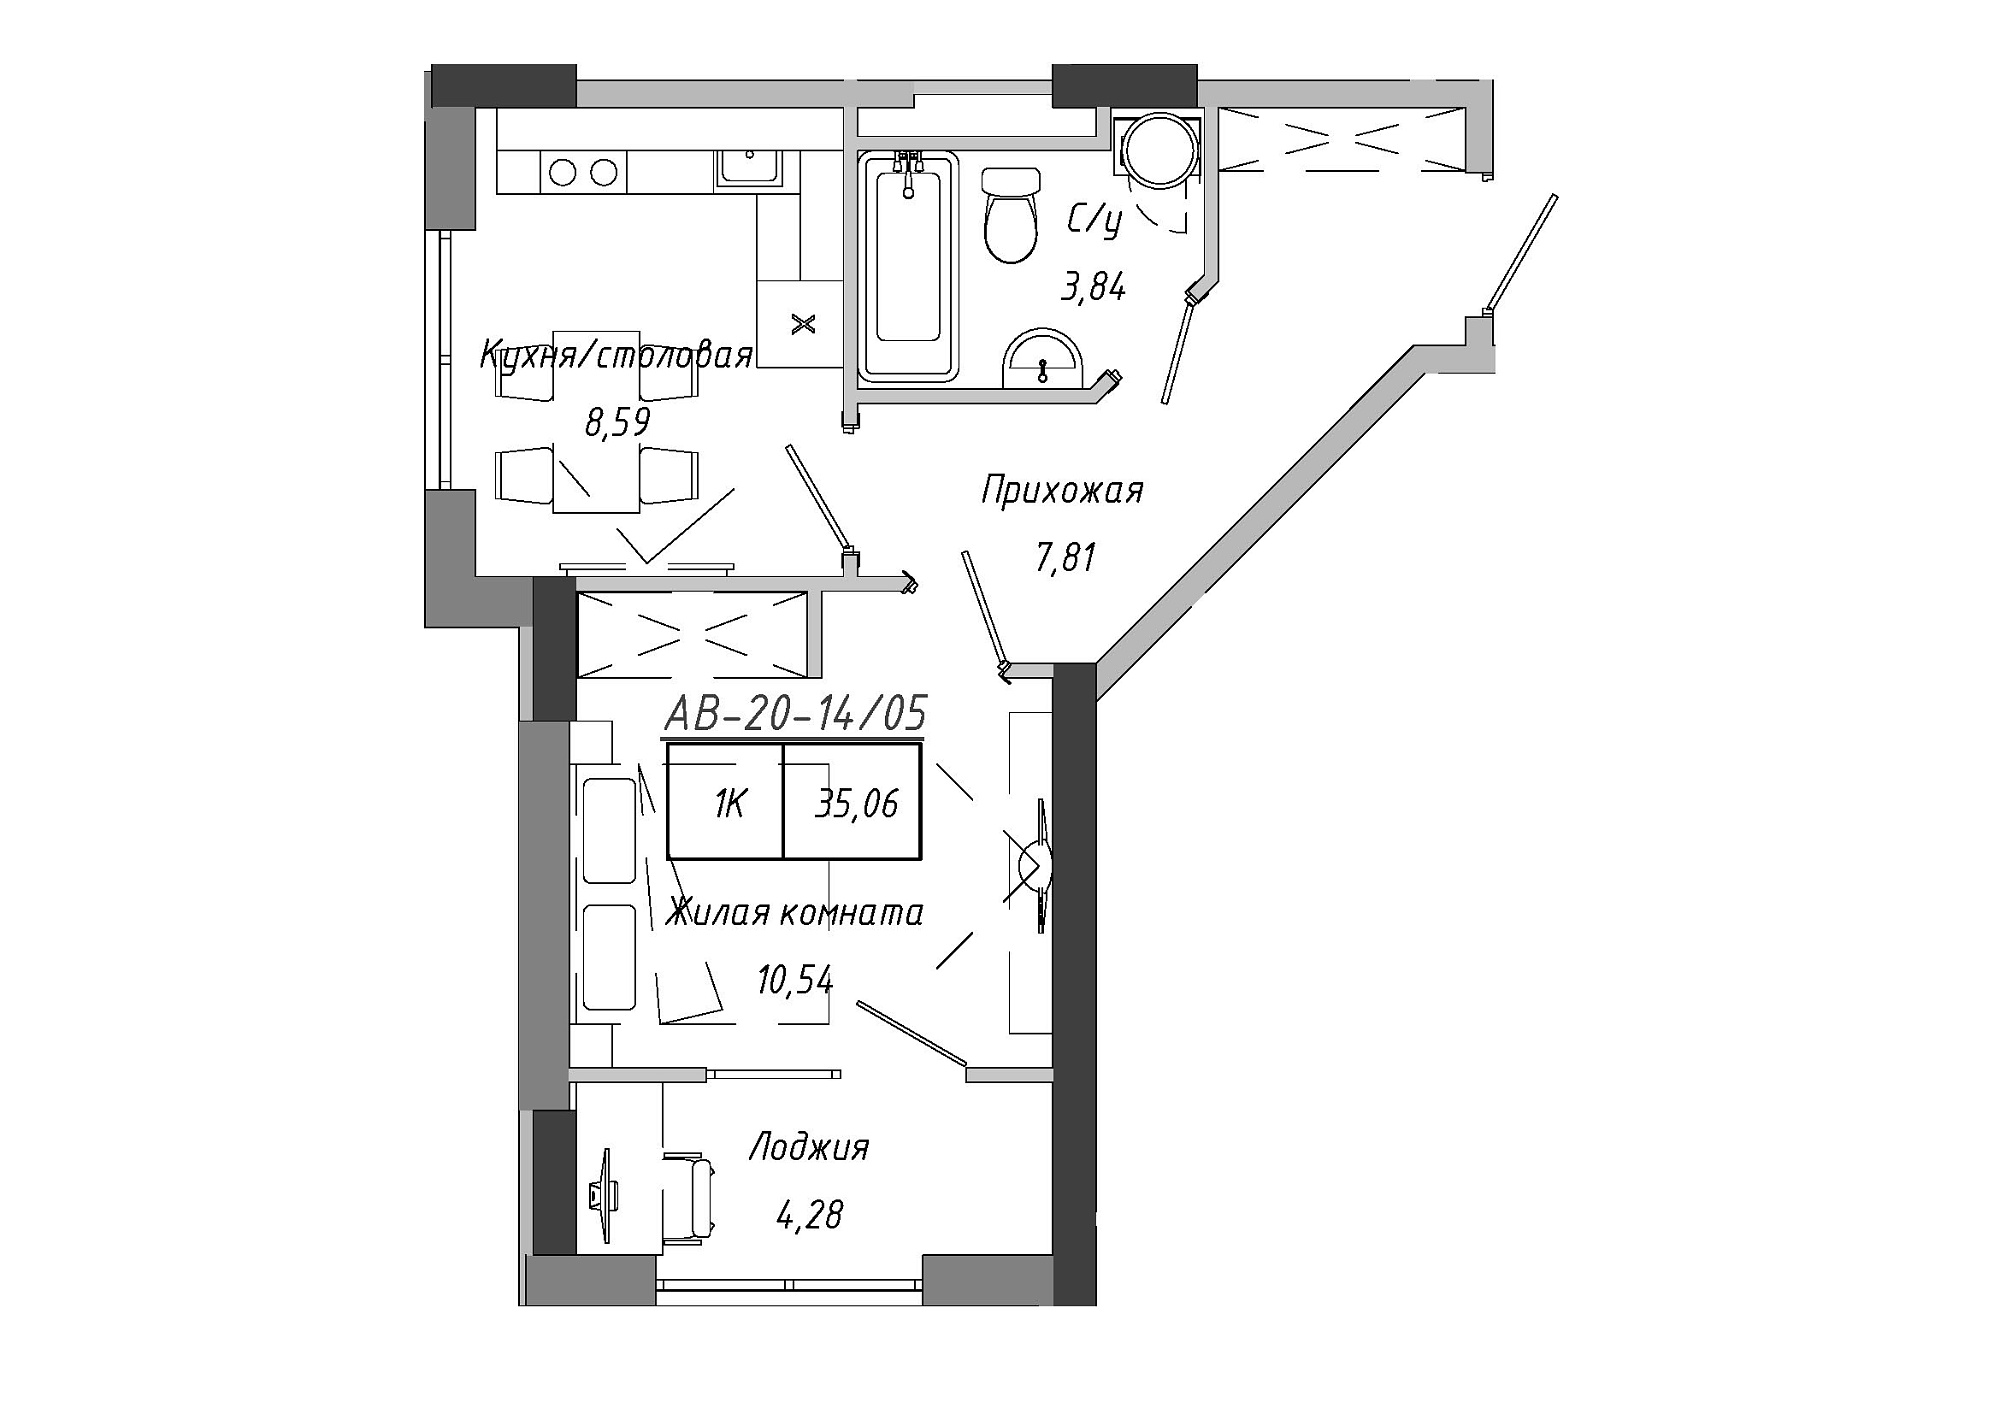 Planning 1-rm flats area 35.06m2, AB-20-14/00105.